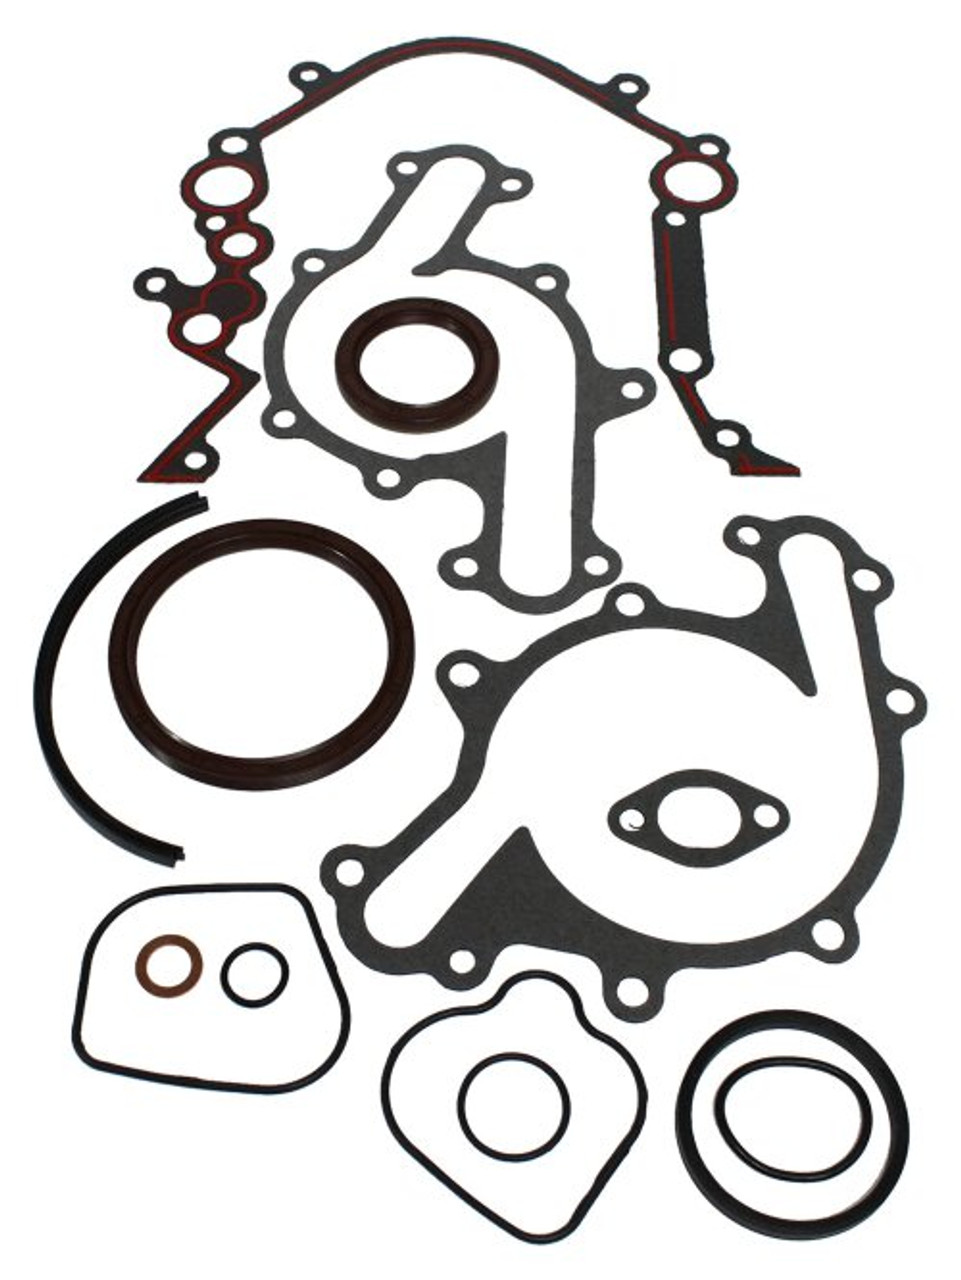 Lower Gasket Set - 1994 Ford Thunderbird 3.8L Engine Parts # LGS4122ZE9